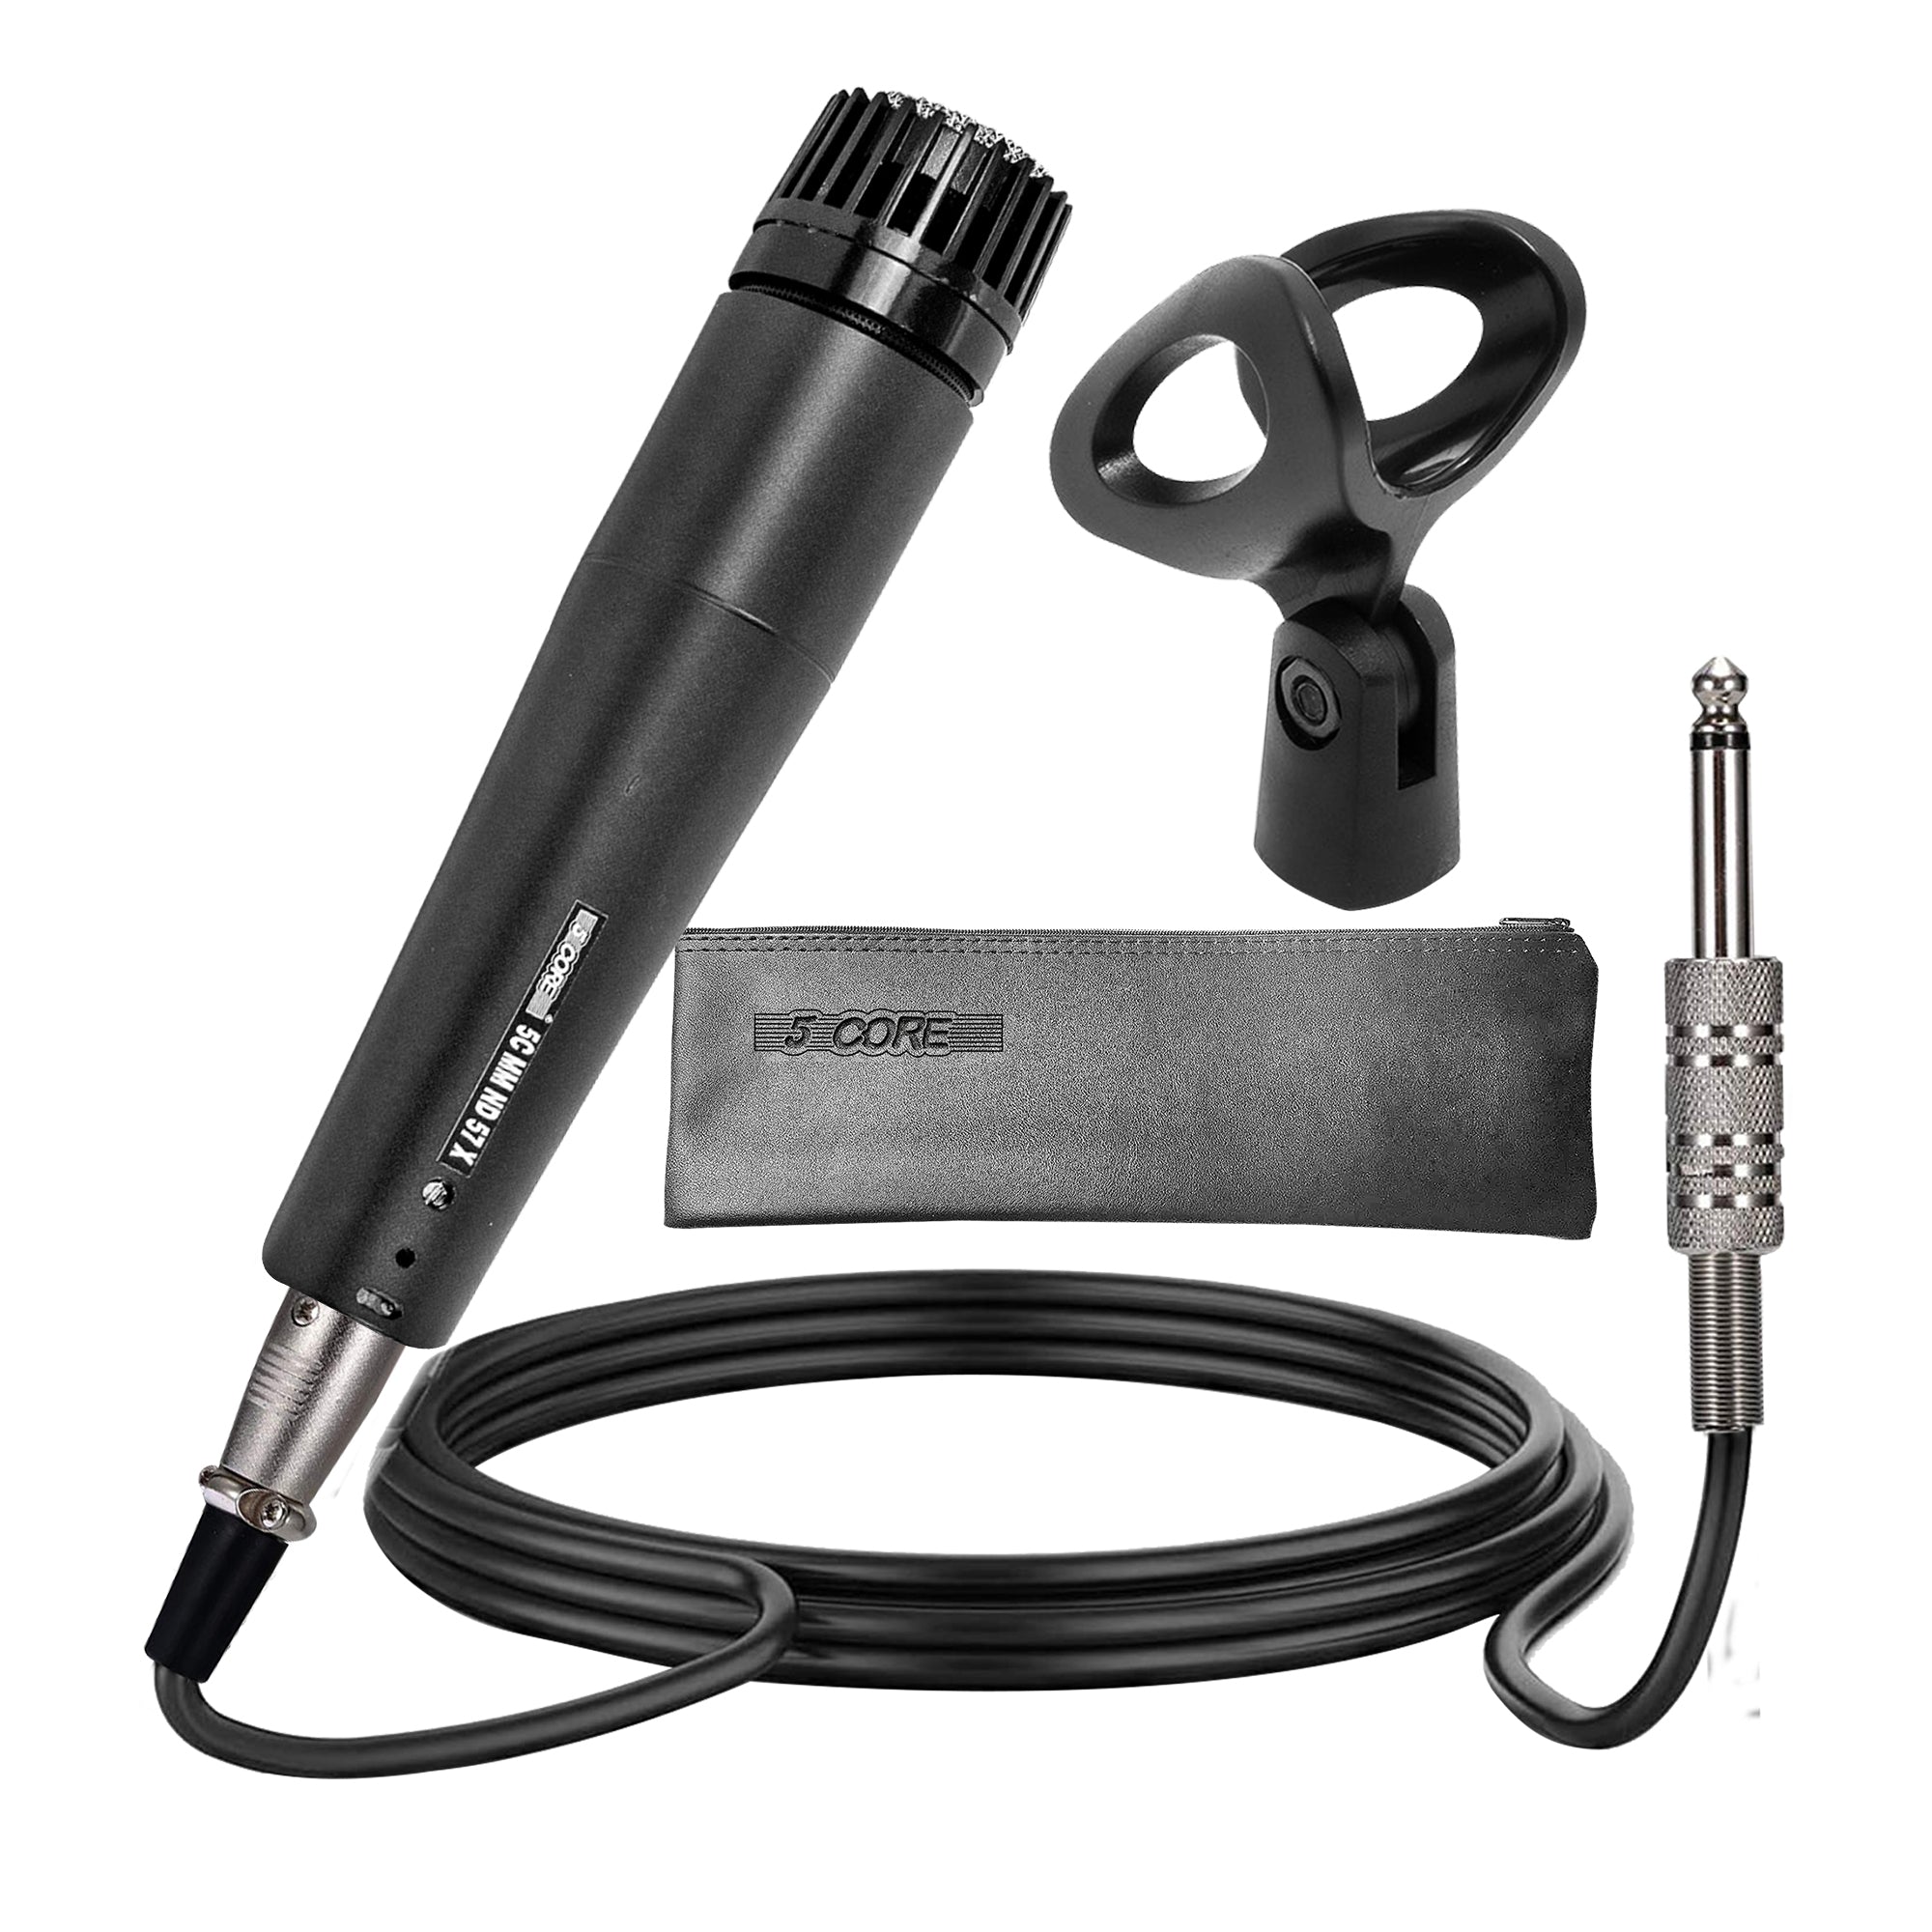 5 Core Handheld Microphone For Singing • Dynamic Neodymium Cardioid Unidirectional Vocal Mic